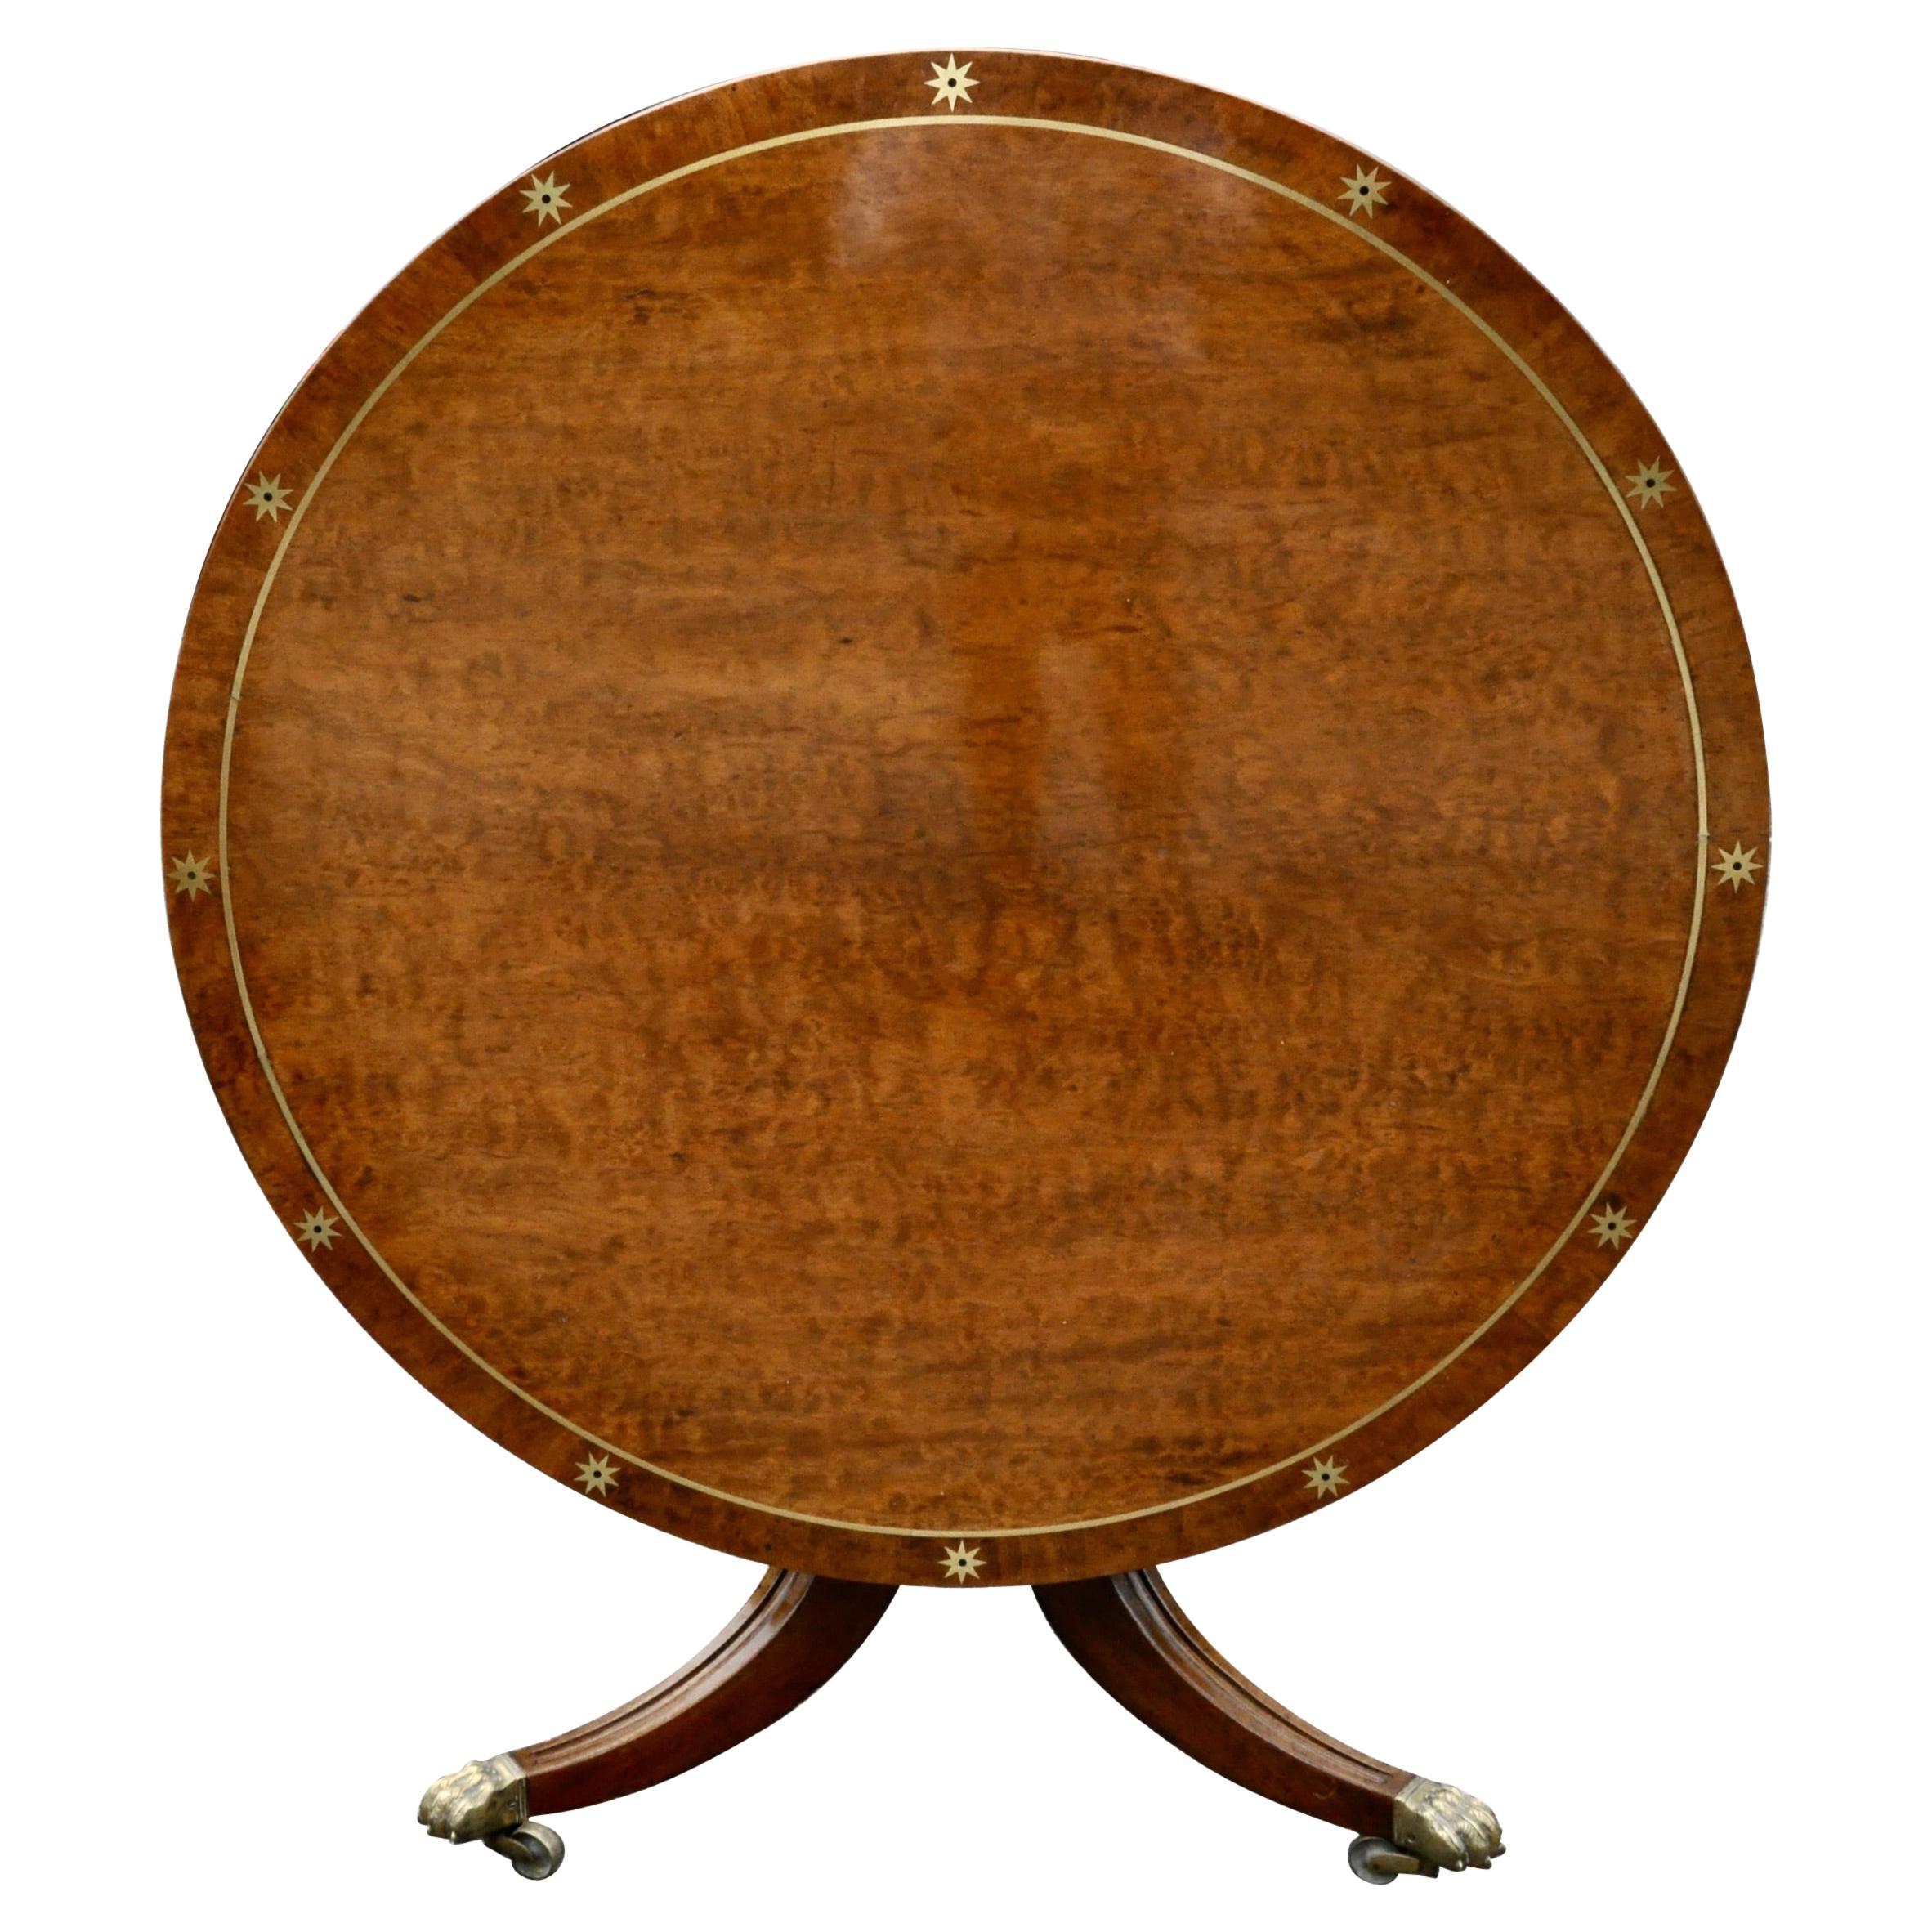 Early 19th Century Regency Anglo Mahogany and Brass Round Center Dining Table